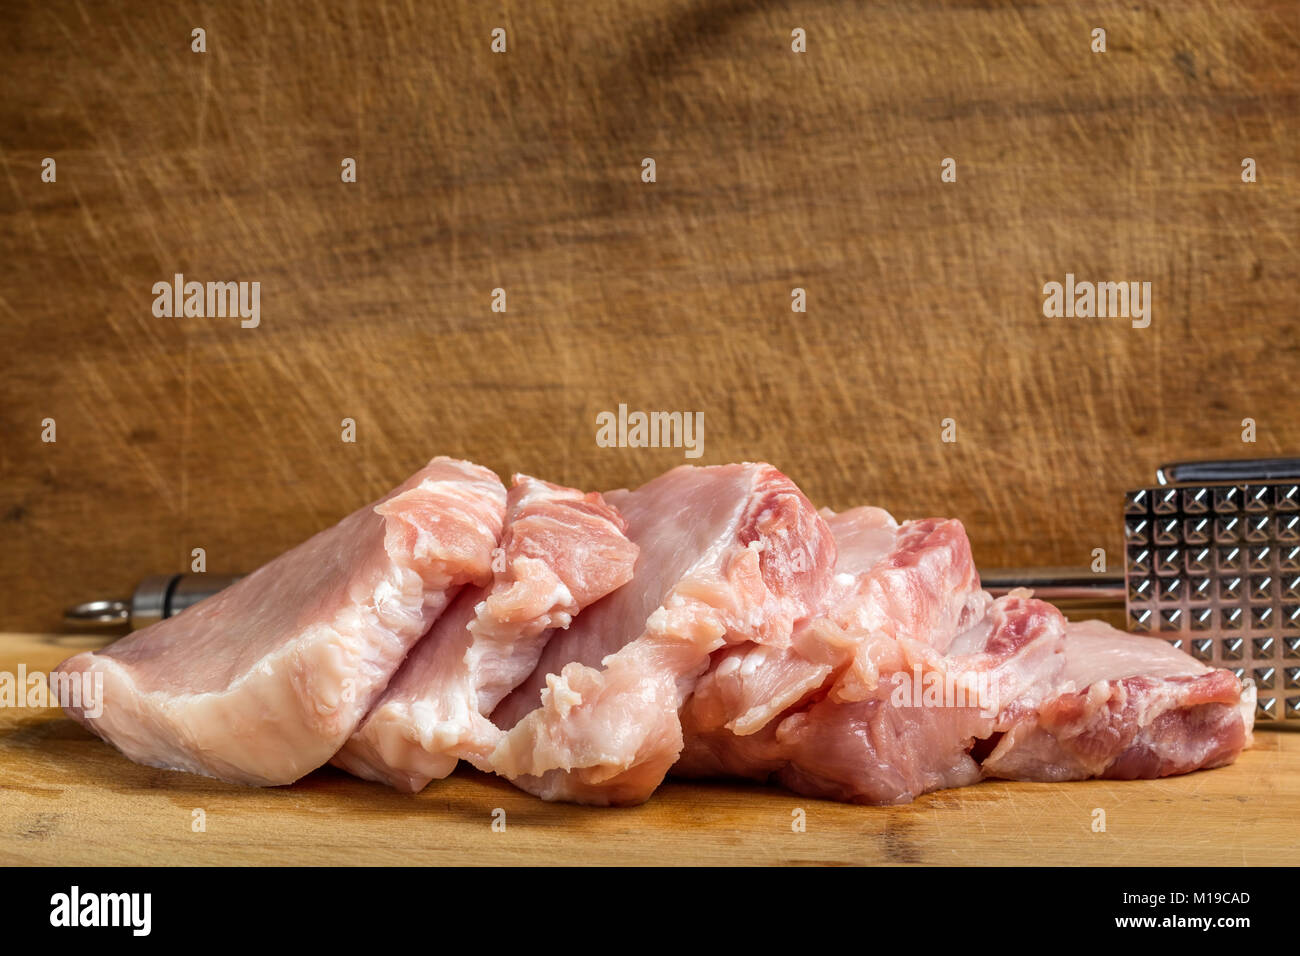 Slices of fresh pork sirloin meat with a metallic hammer for beating meat on wooden cutting board Stock Photo